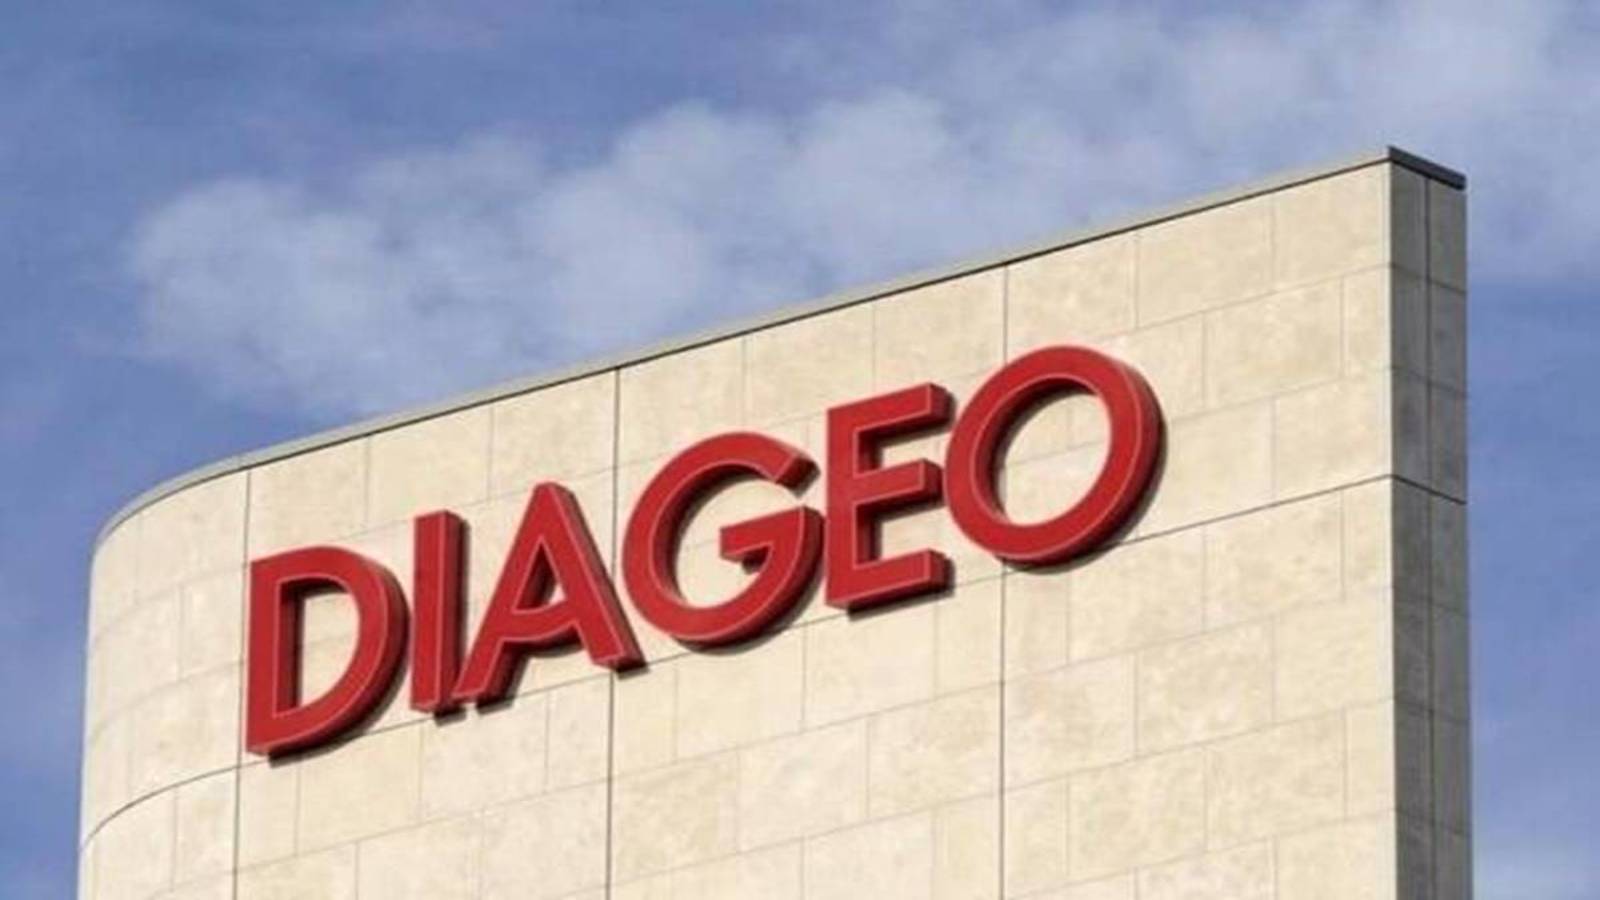 Diageo reports 16% organic growth in full year revenues driven by sales rebound in North America